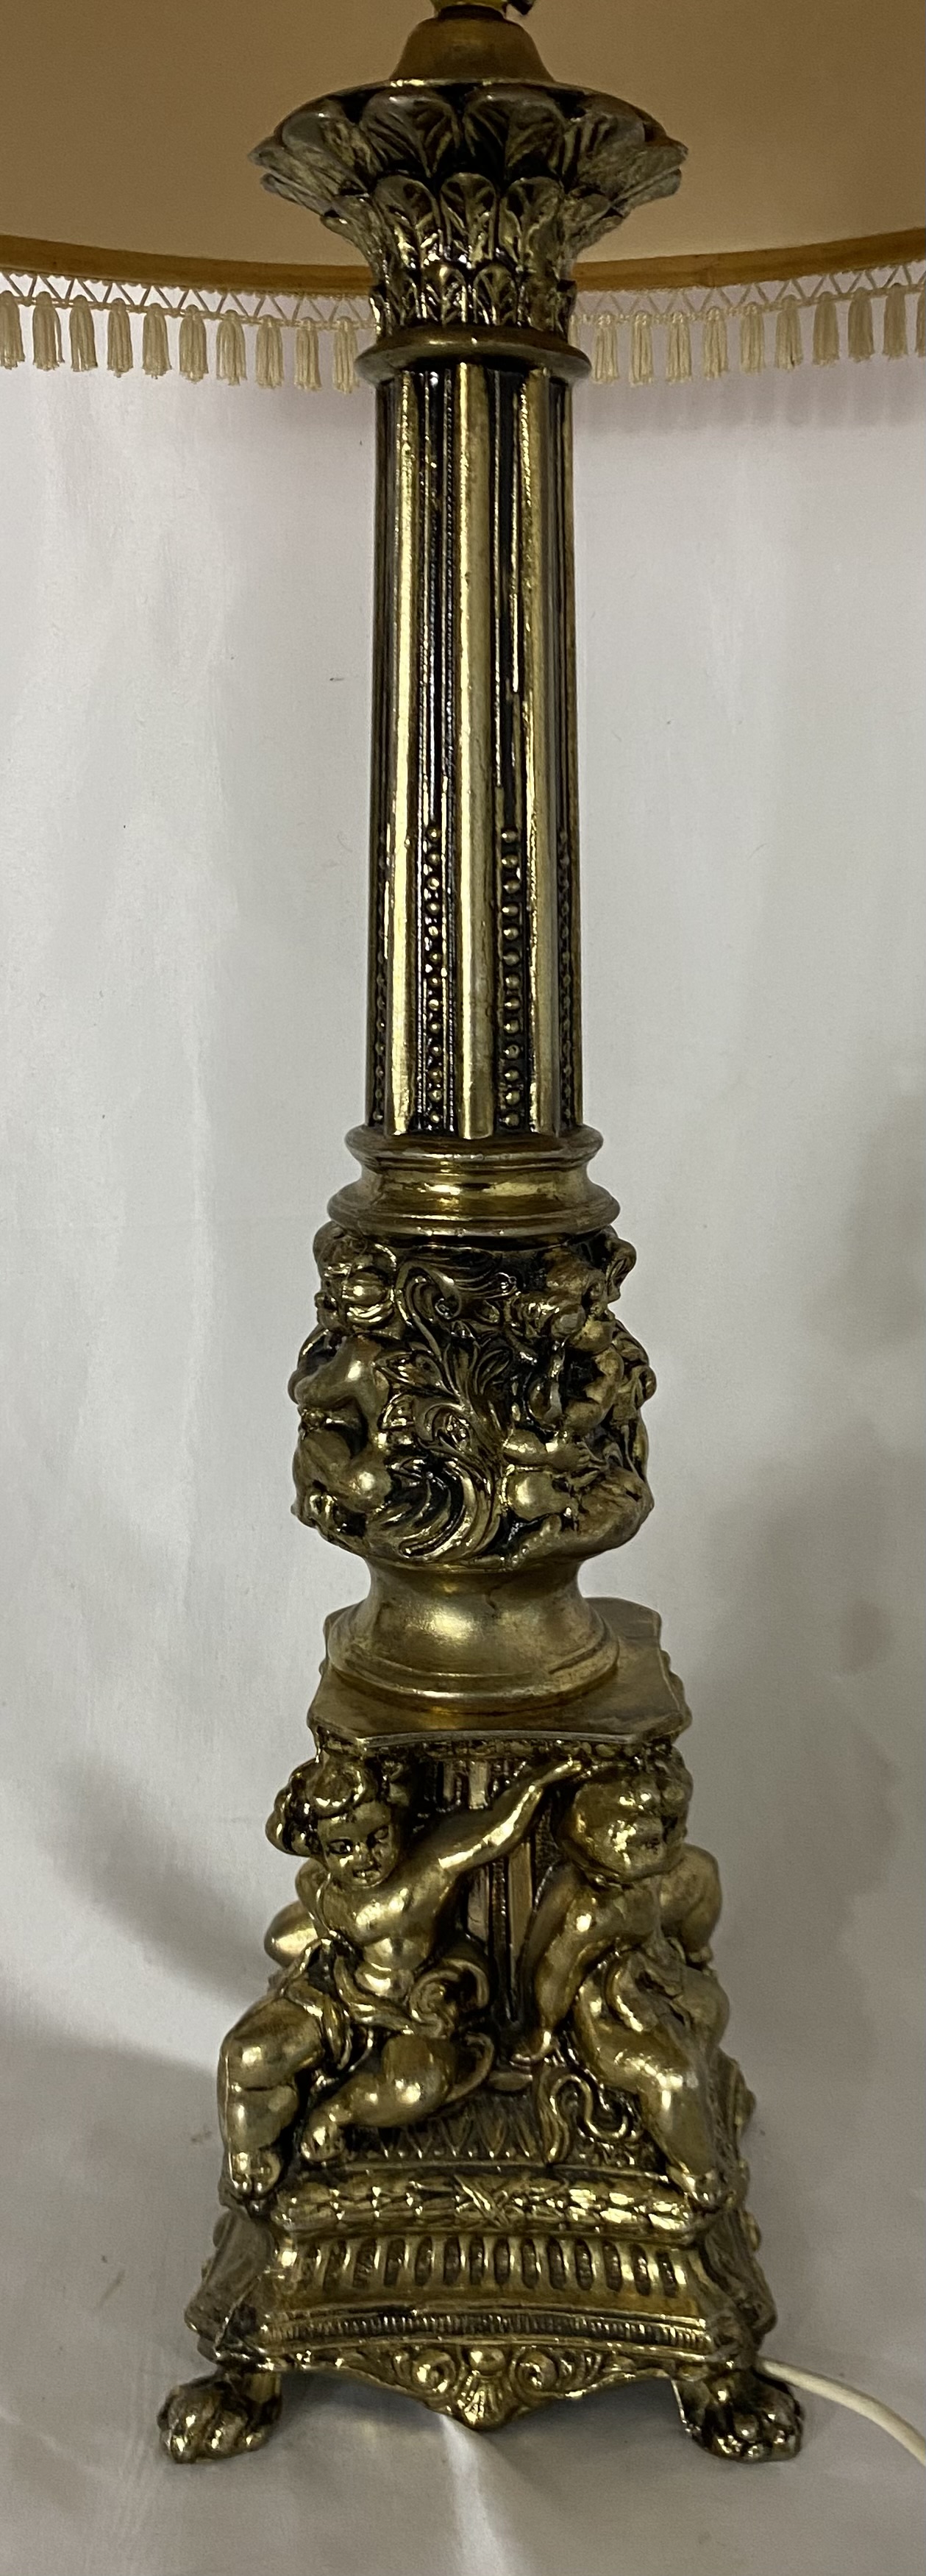 A large brass Ecclesiastical style table lamp, height of lamp 58cm - Image 2 of 5